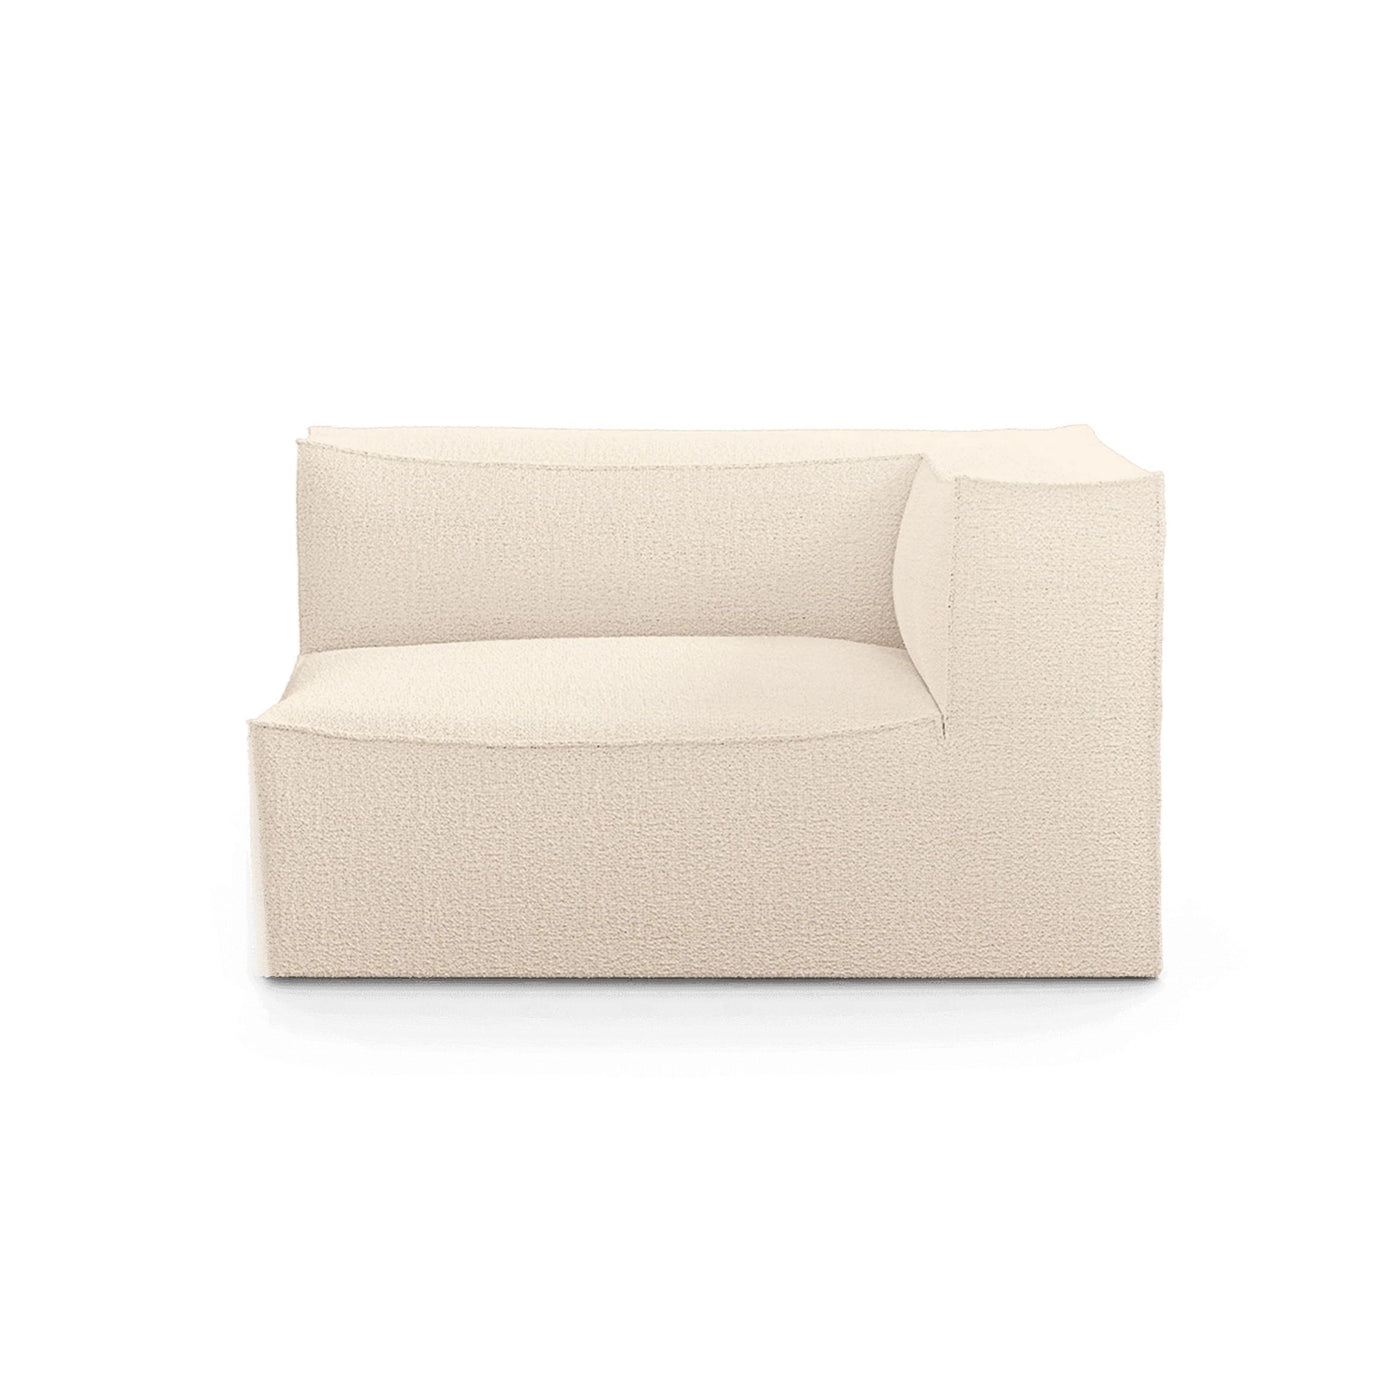 Ferm Living Catena Modular Series. Shop online at someday designs. L401 armrest right in #colour_off-white-wool-boucle